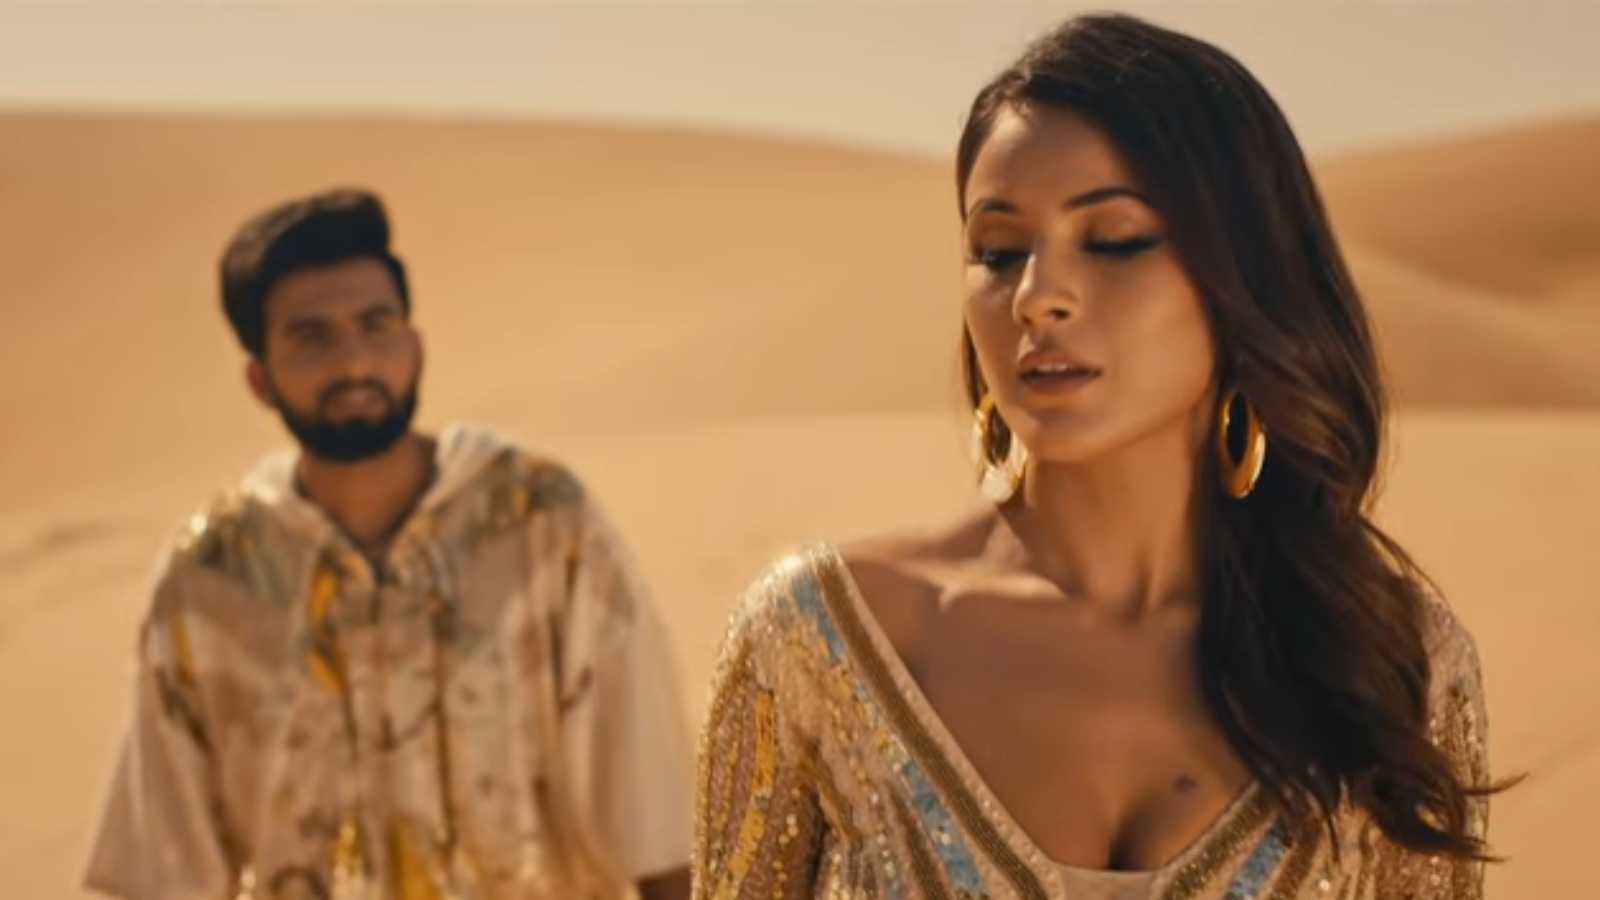 Shehnaaz Gill turns up the heat in the teaser of her music video 'Ghani Sayani', fans drool over transformation from adorable to hot